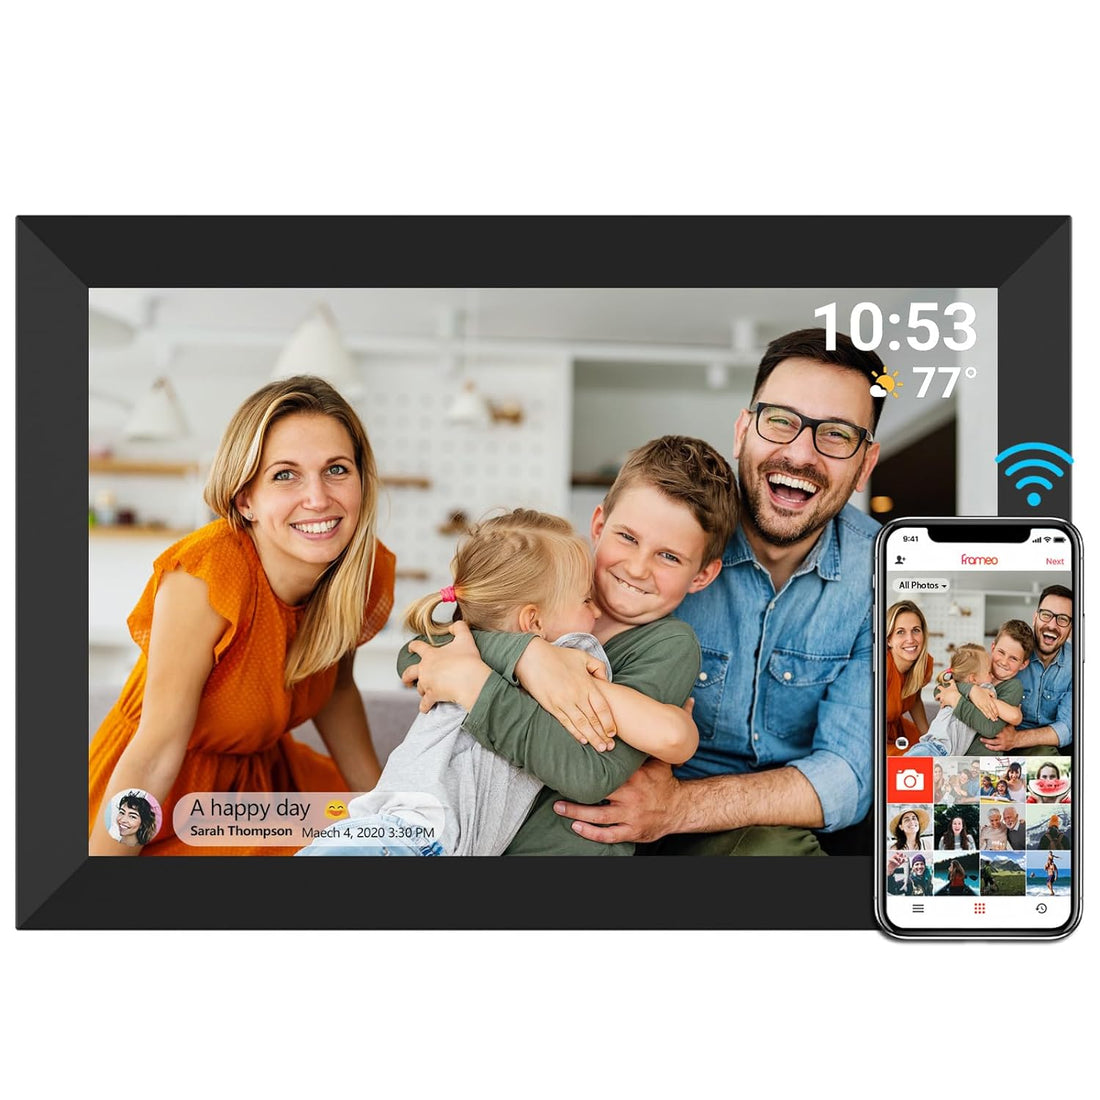 FRAMEO Smart Digital Picture Frame WiFi Cloud 10.1 Inch HD 1280x800 IPS Touch Screen Digital Frame with 16GB Storage Easy Setup to Share Photos or Video via Frameo APP Auto-Rotate Wall Mountable Black